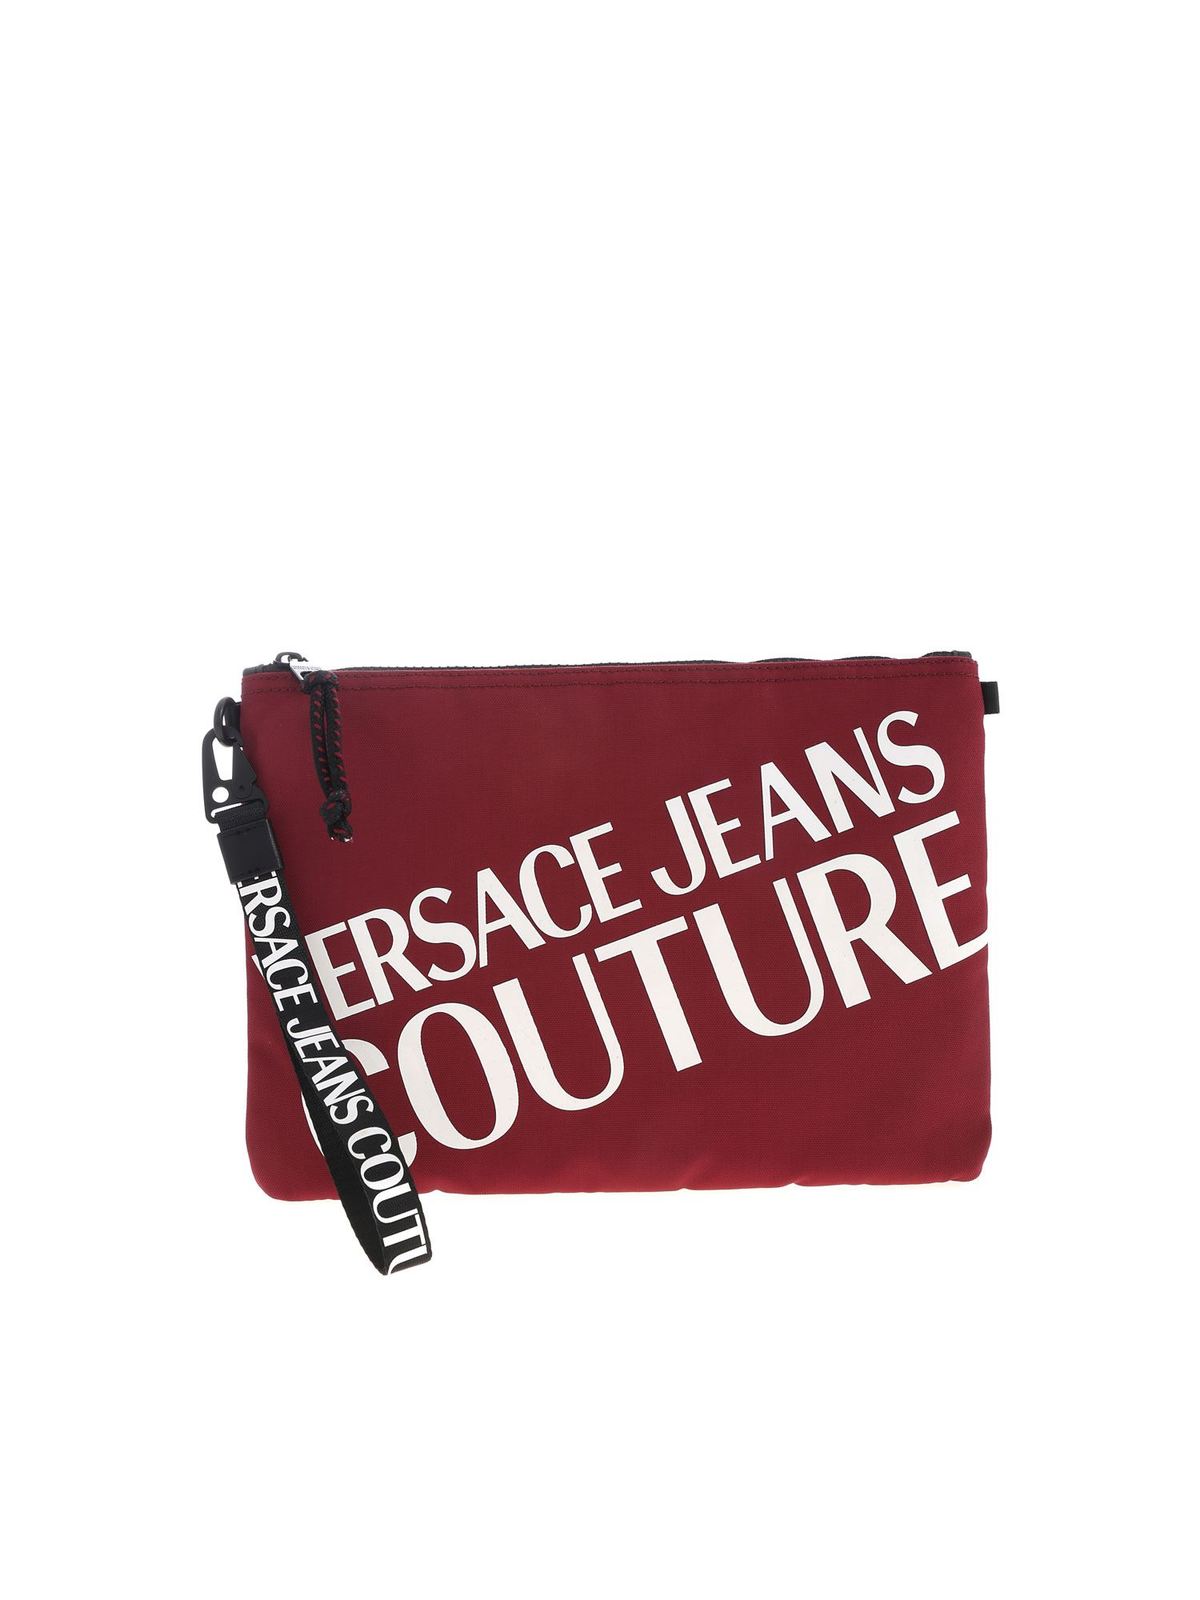 VERSACE JEANS COUTURE MACRO LOGO POCHETTE IN RED